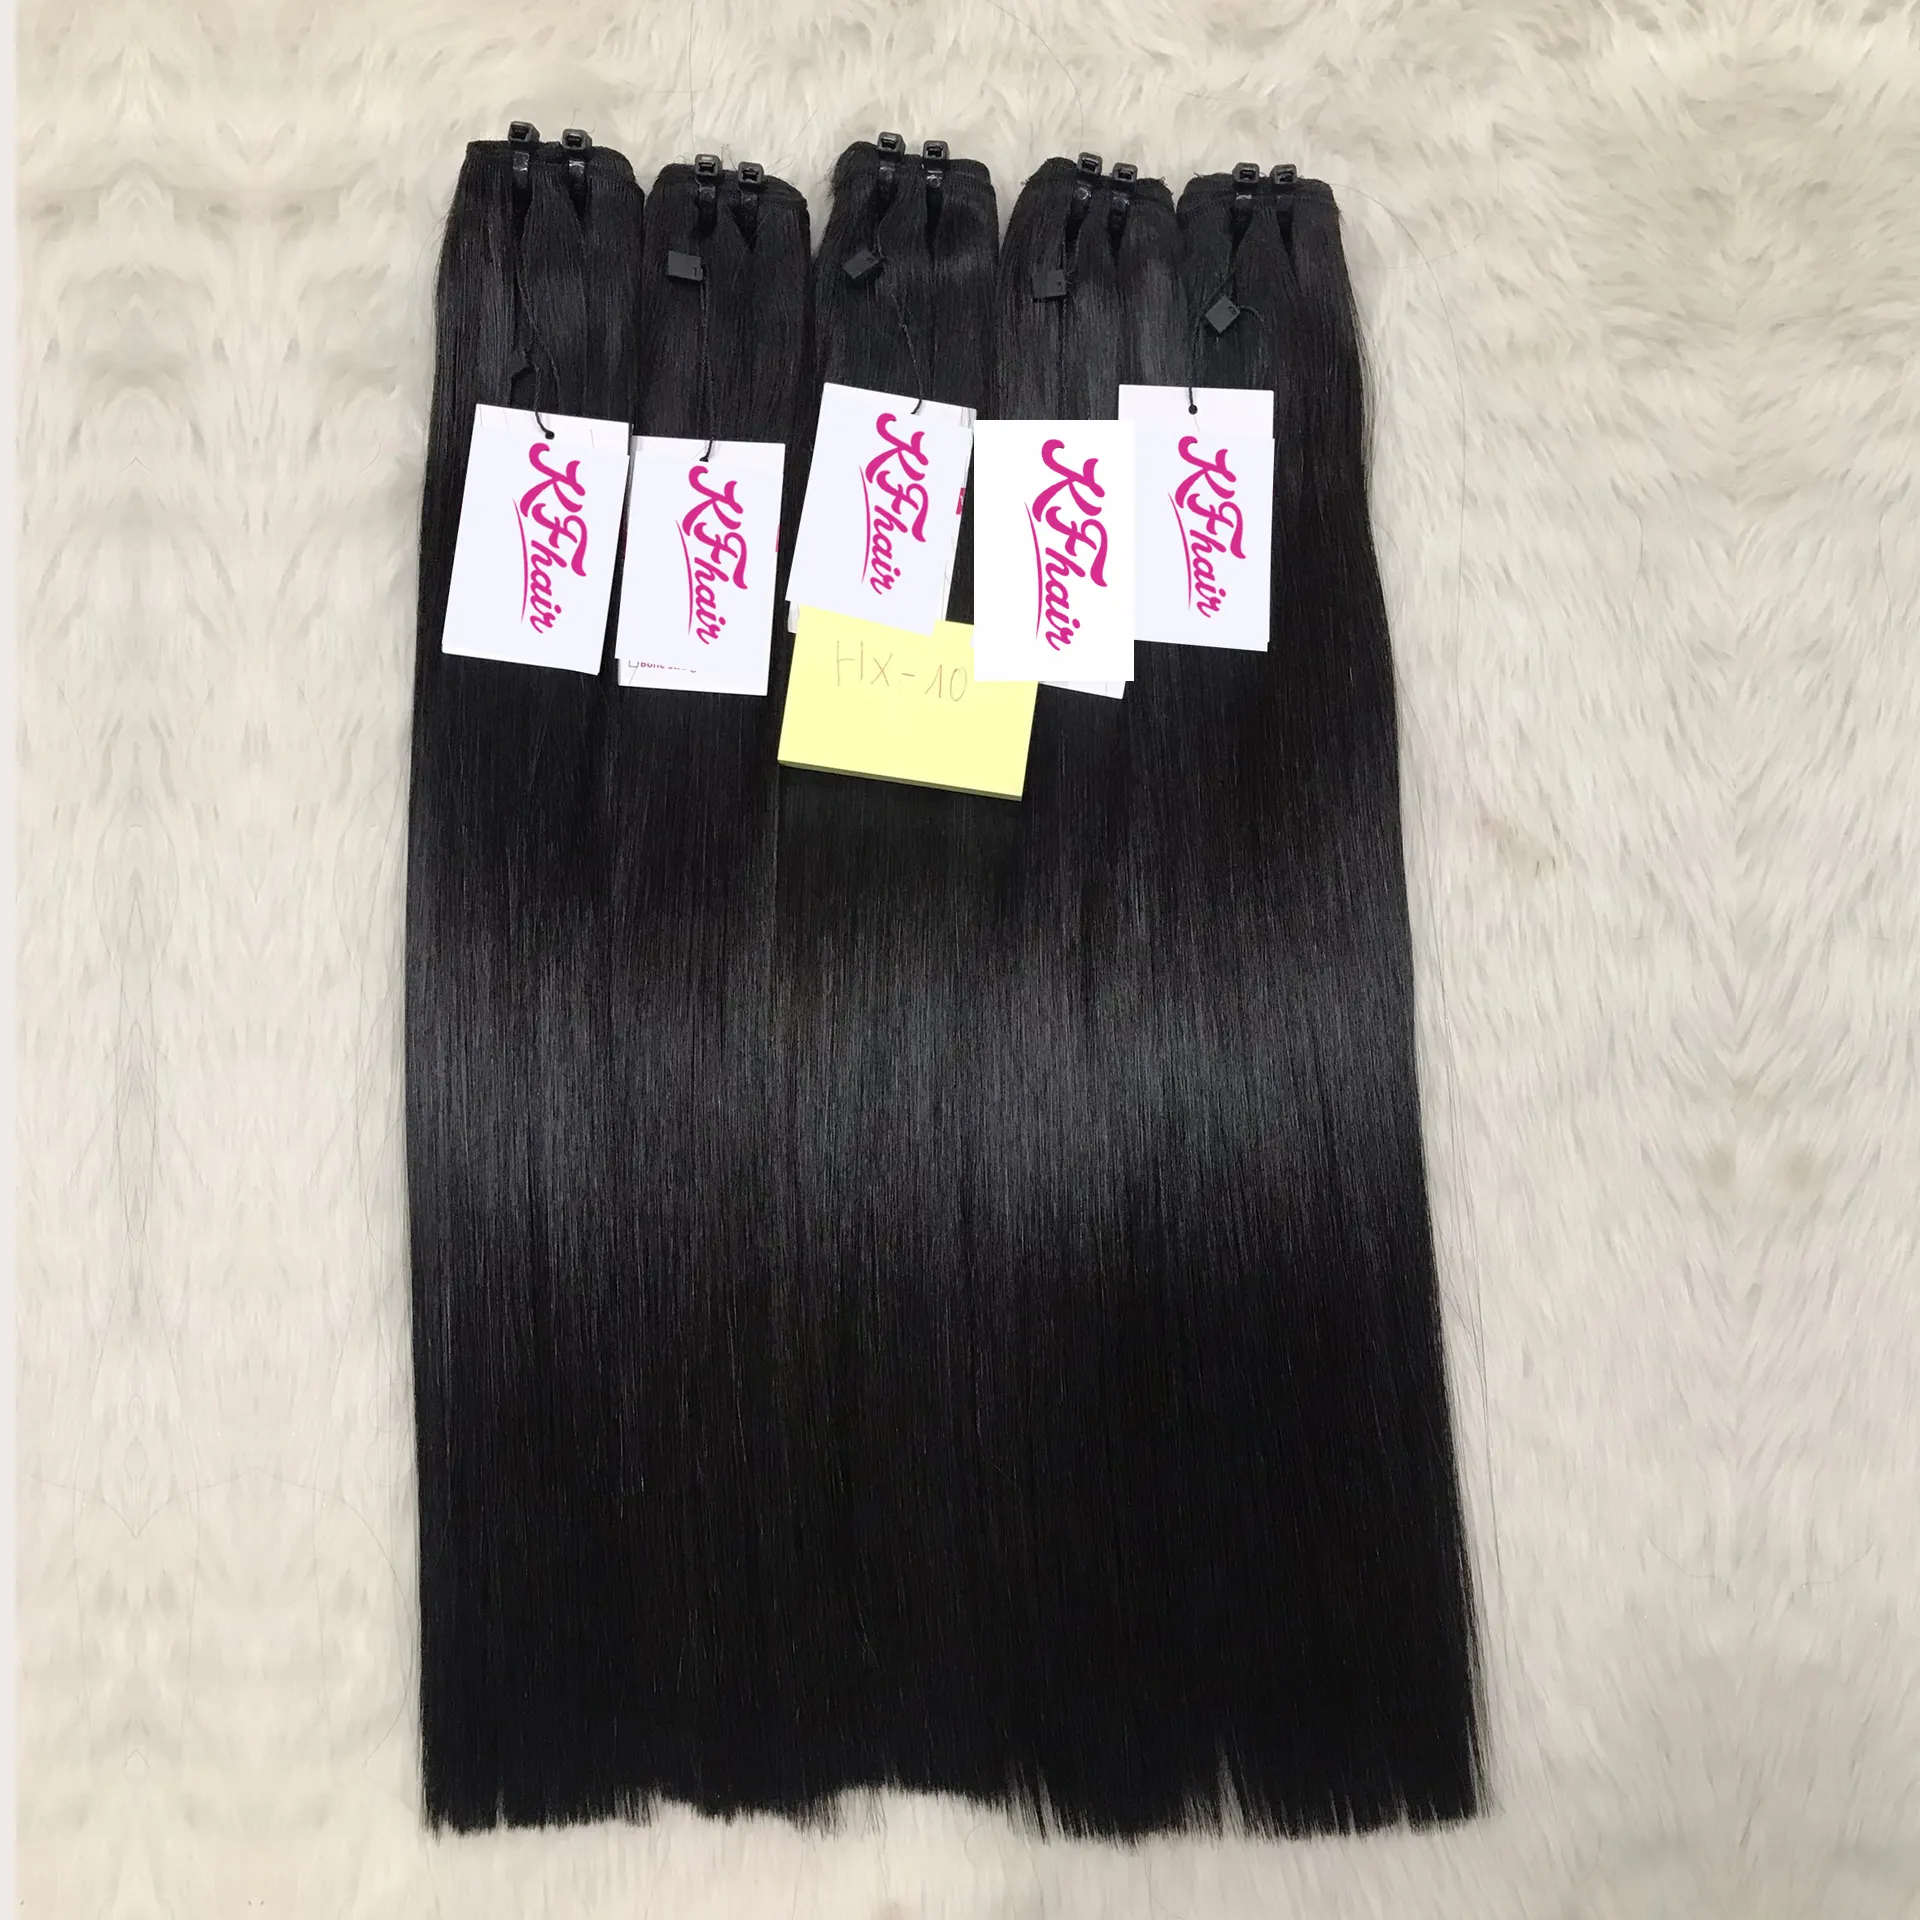 Wholesale 100% virgin natural raw hair human hair blend mix with synthetic can be dye any colors as you like